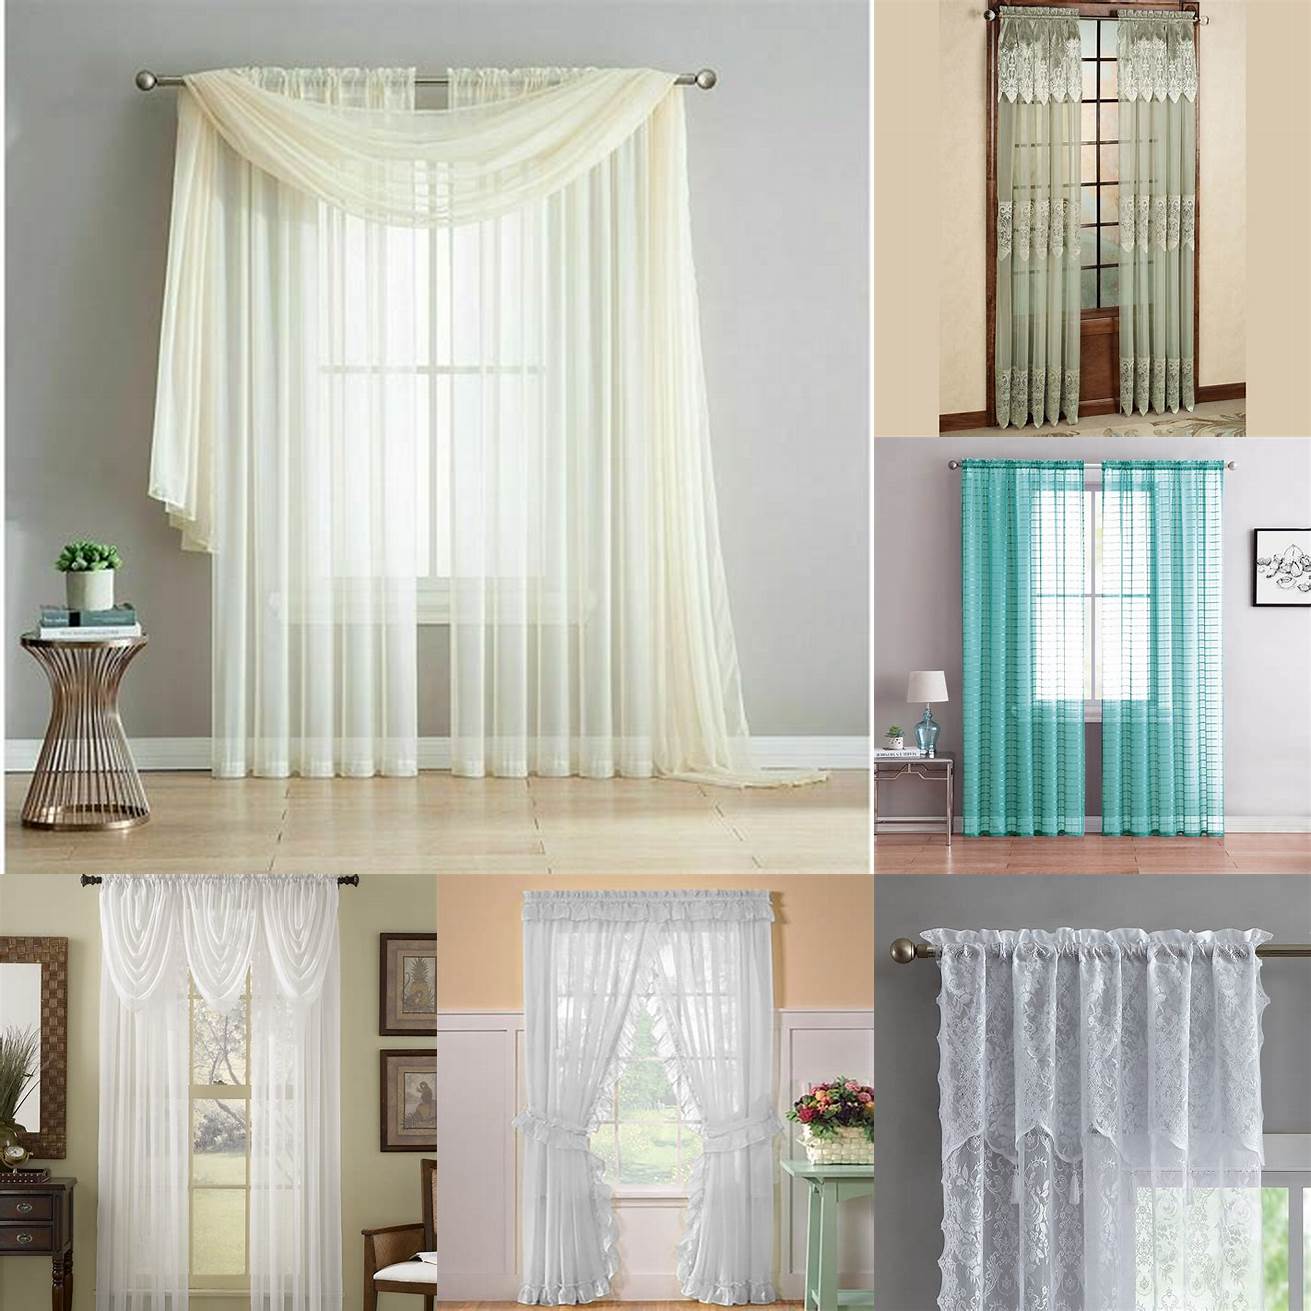 1 Sheer curtains with a valance